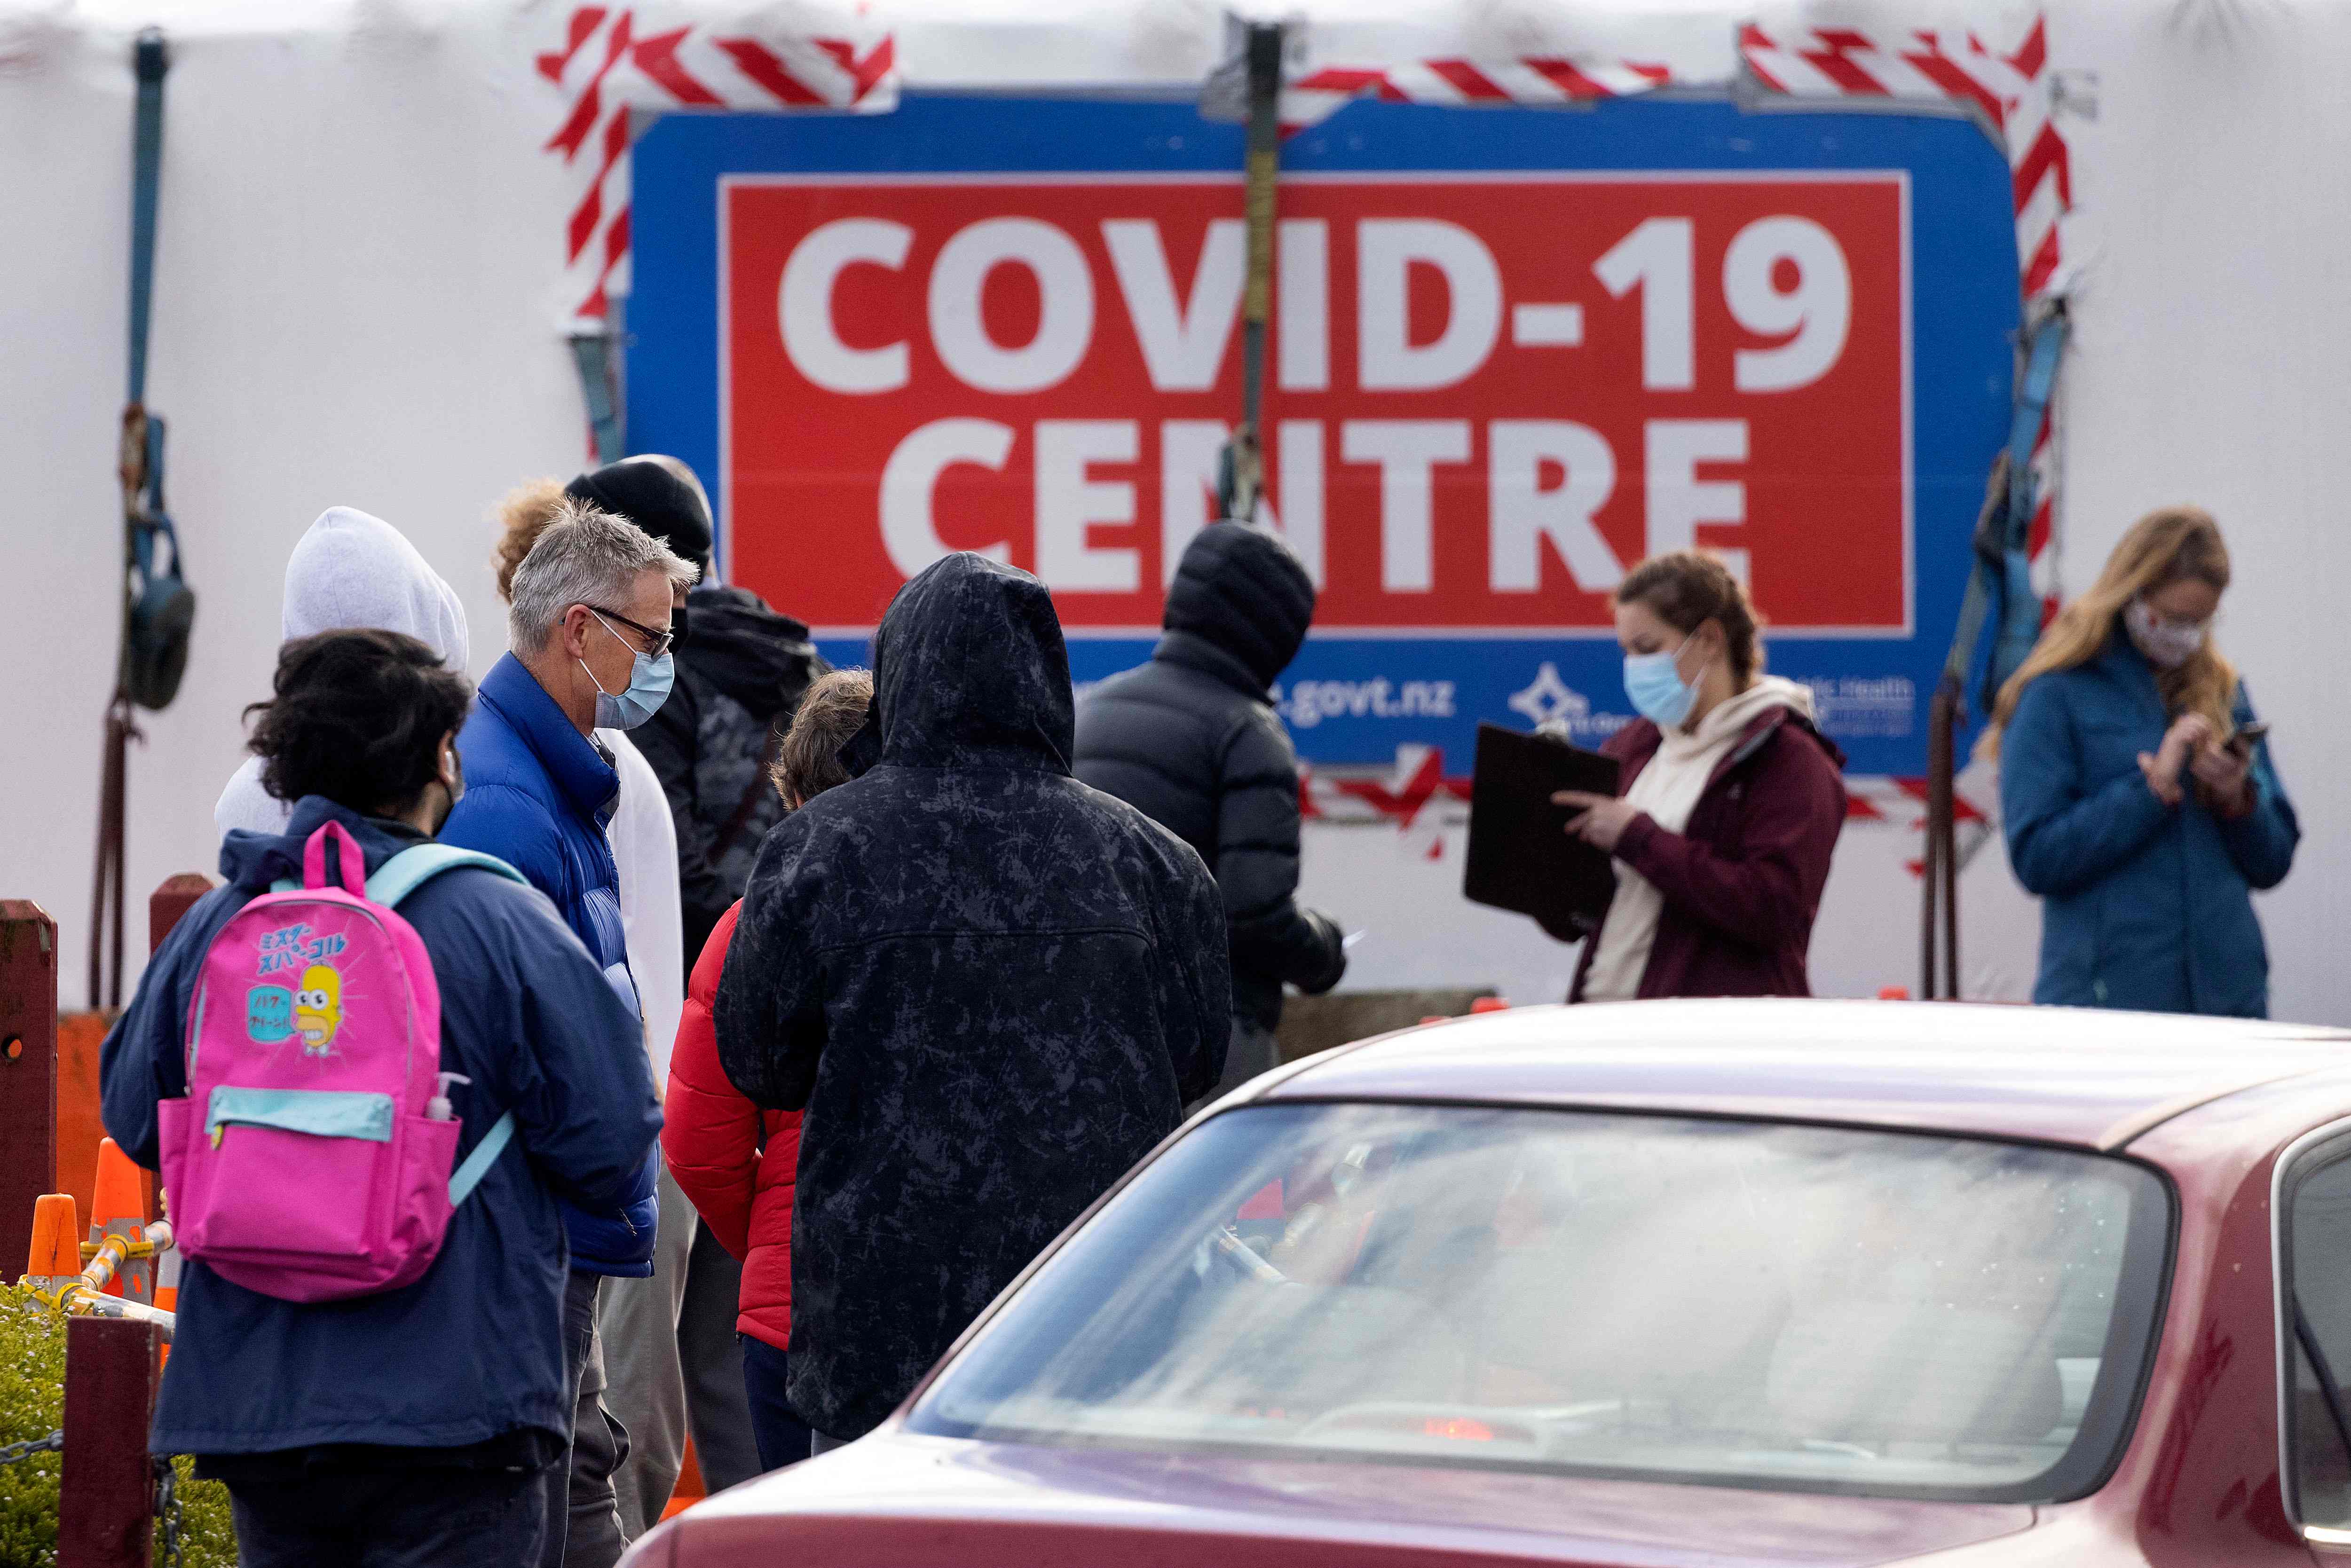 People visit a Covid-19 testing station during a nationwide lockdown in Wellington on 18 August 2021